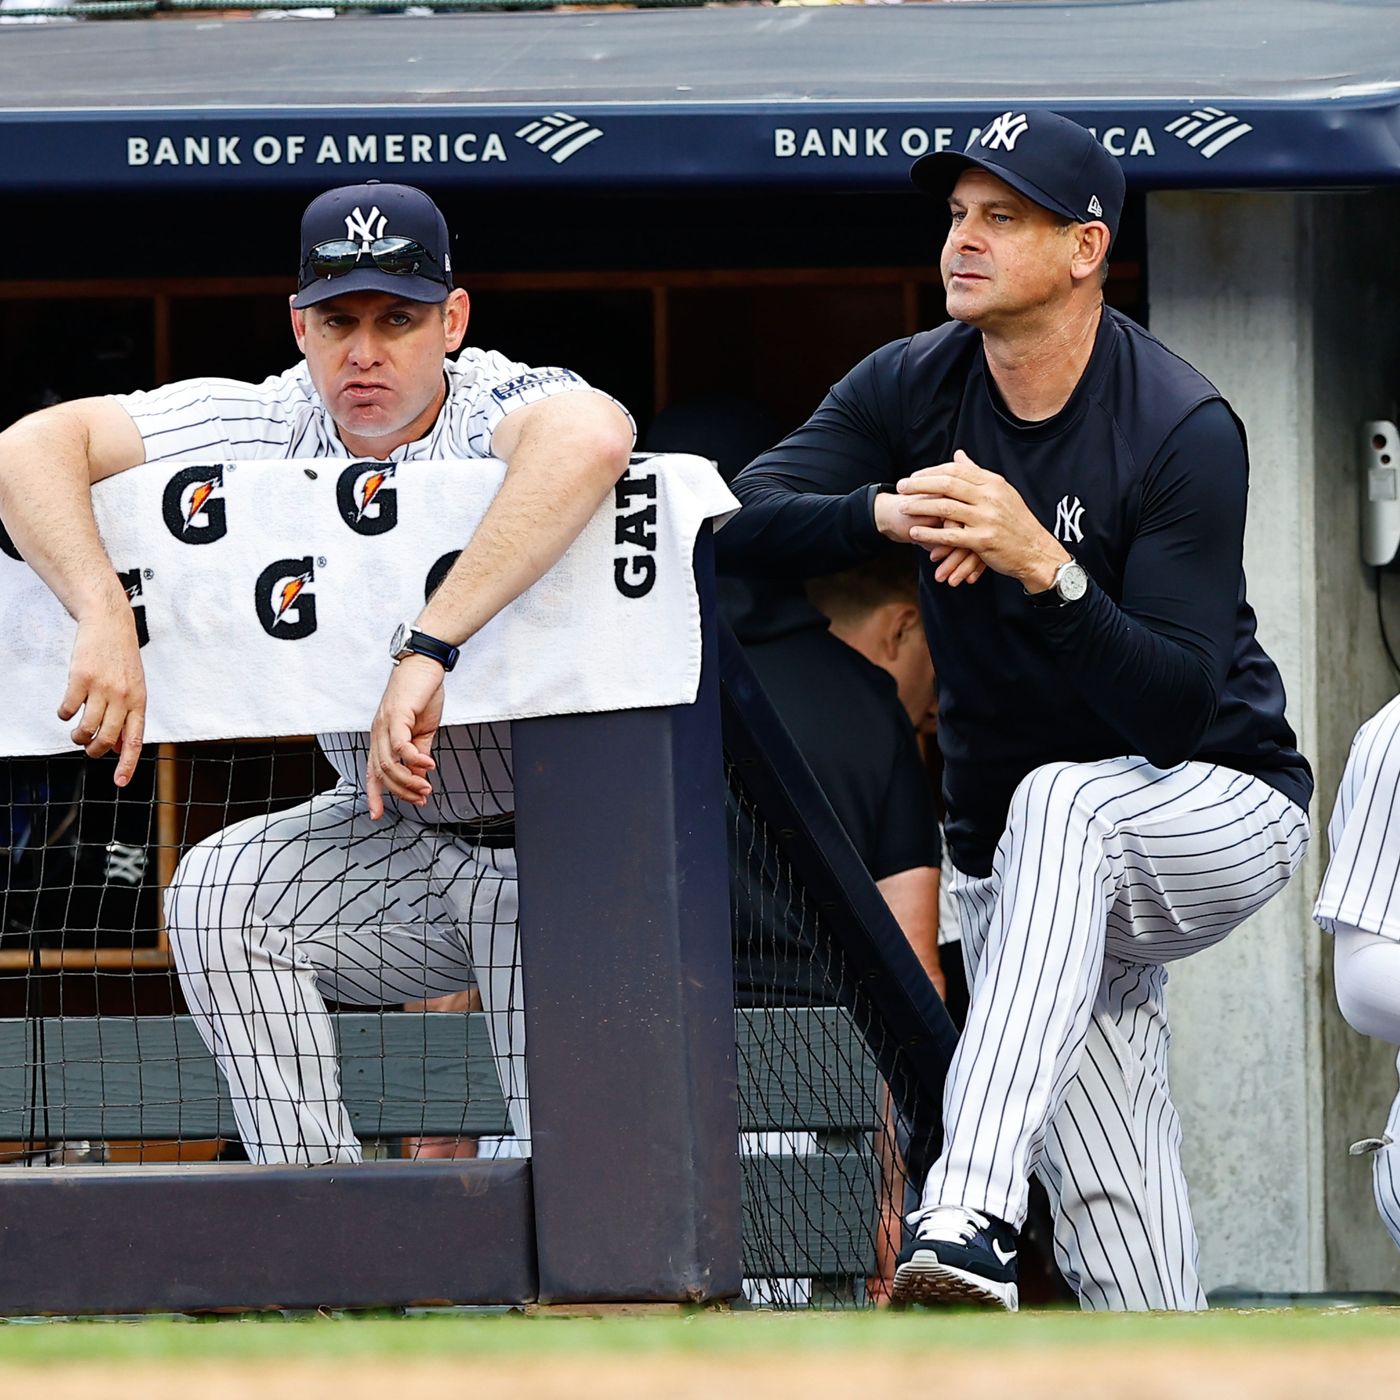 New York Yankees: This is the most likable Yankees team in a long time